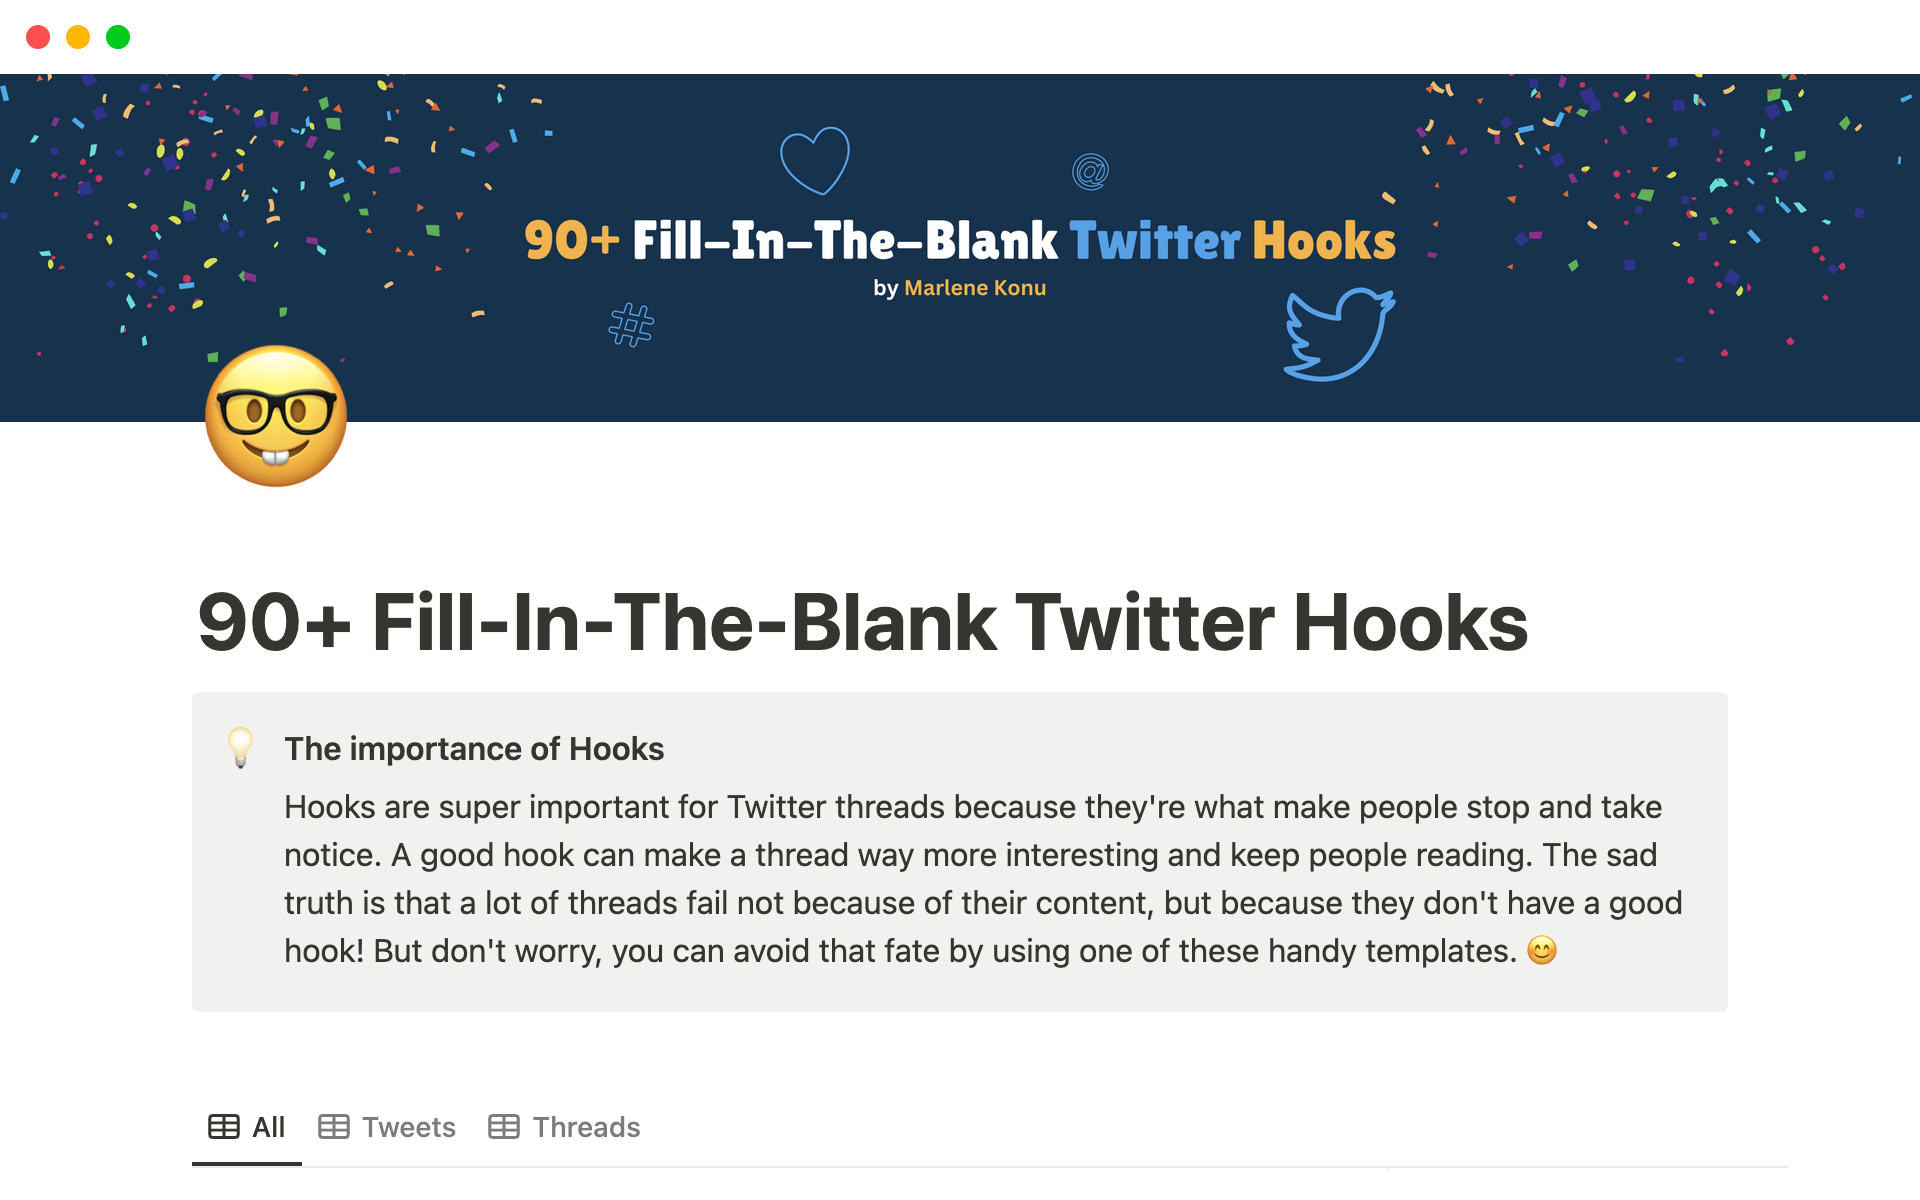 Skyrocket your Twitter impression and growth with the best performing hooks from the top 1% of content creators.